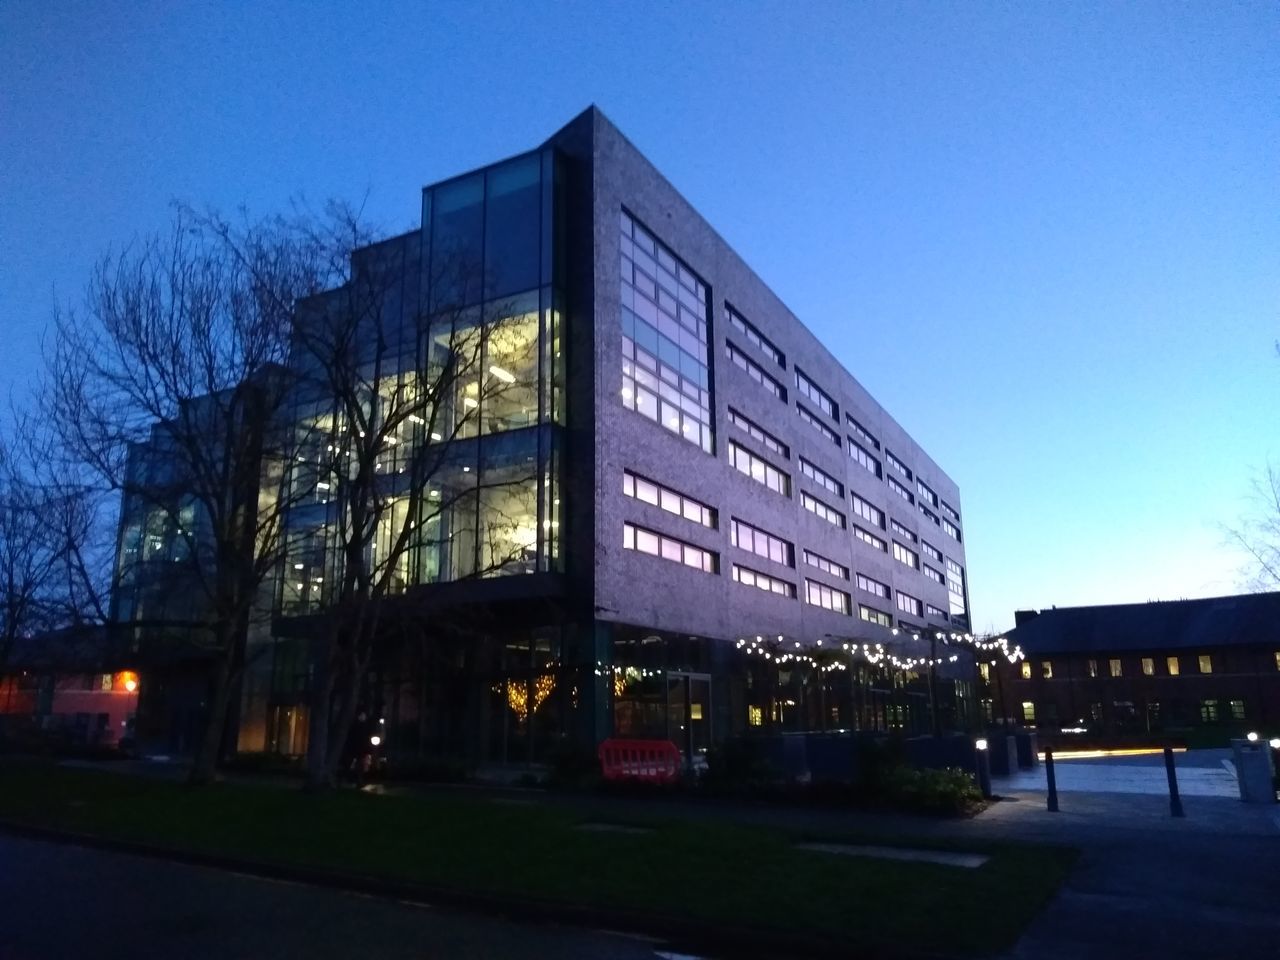 Manchester Science Partnerships Bright Building